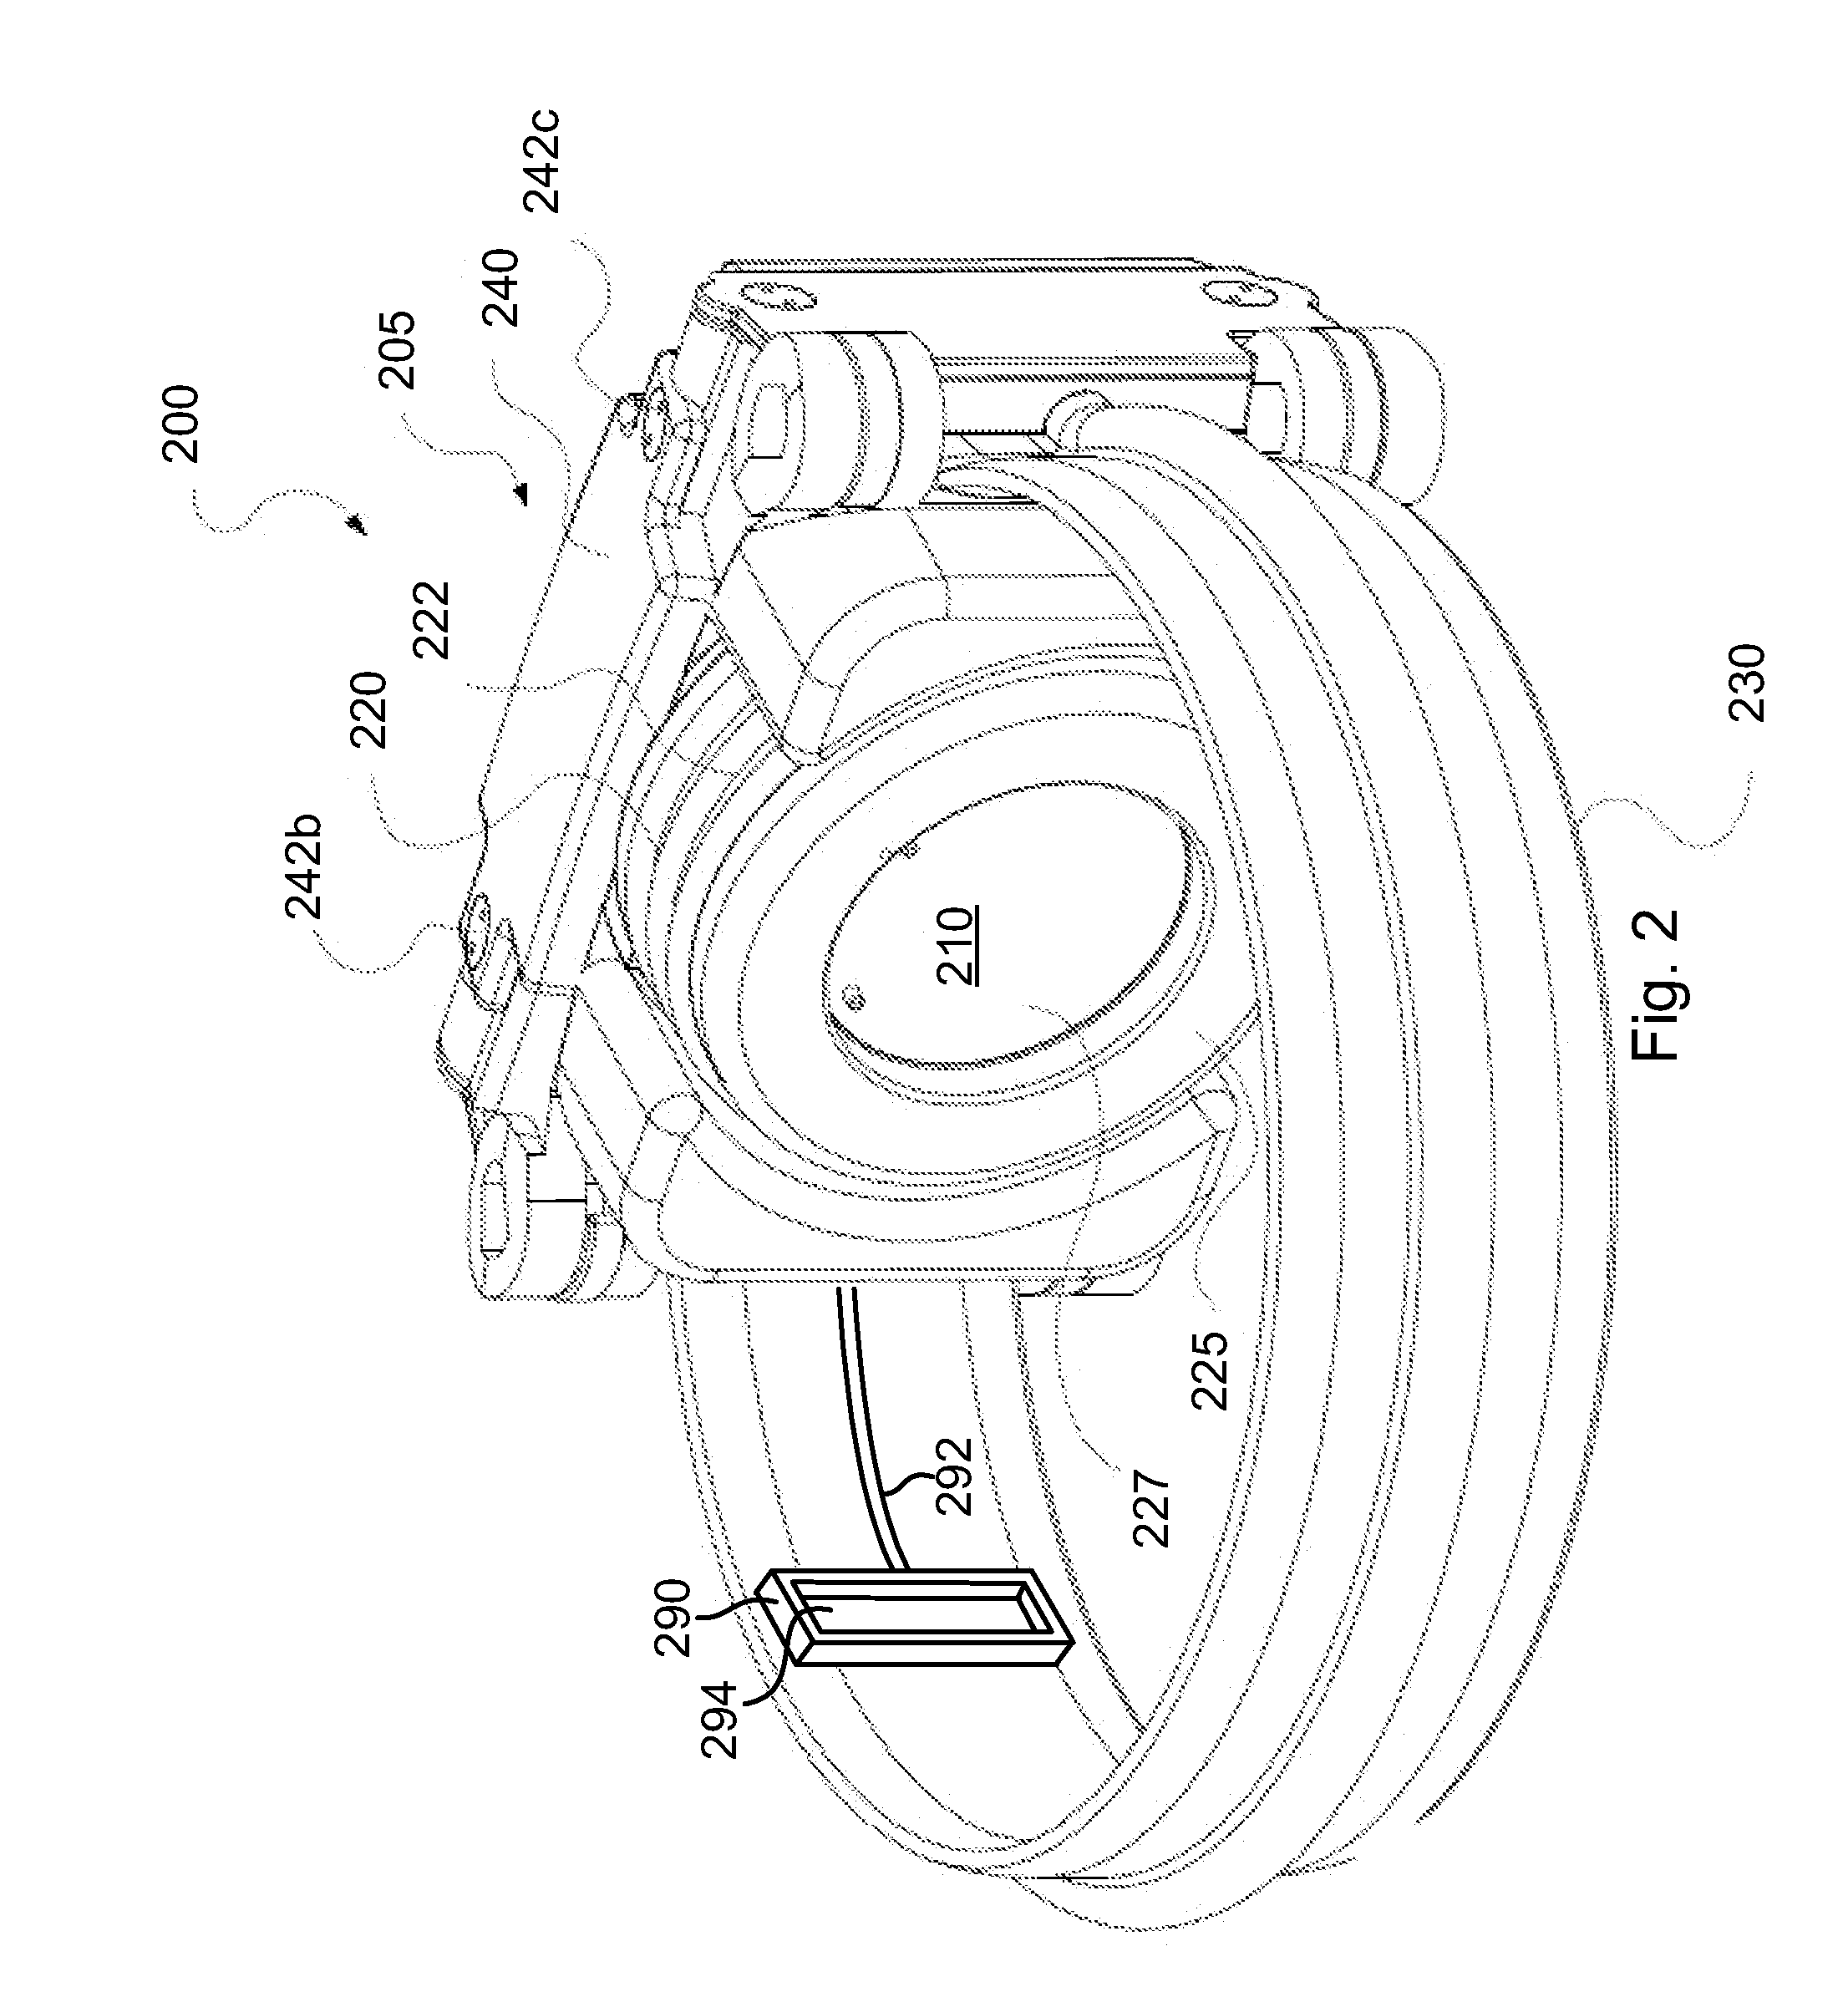 Systems and methods for alcohol consumption monitoring